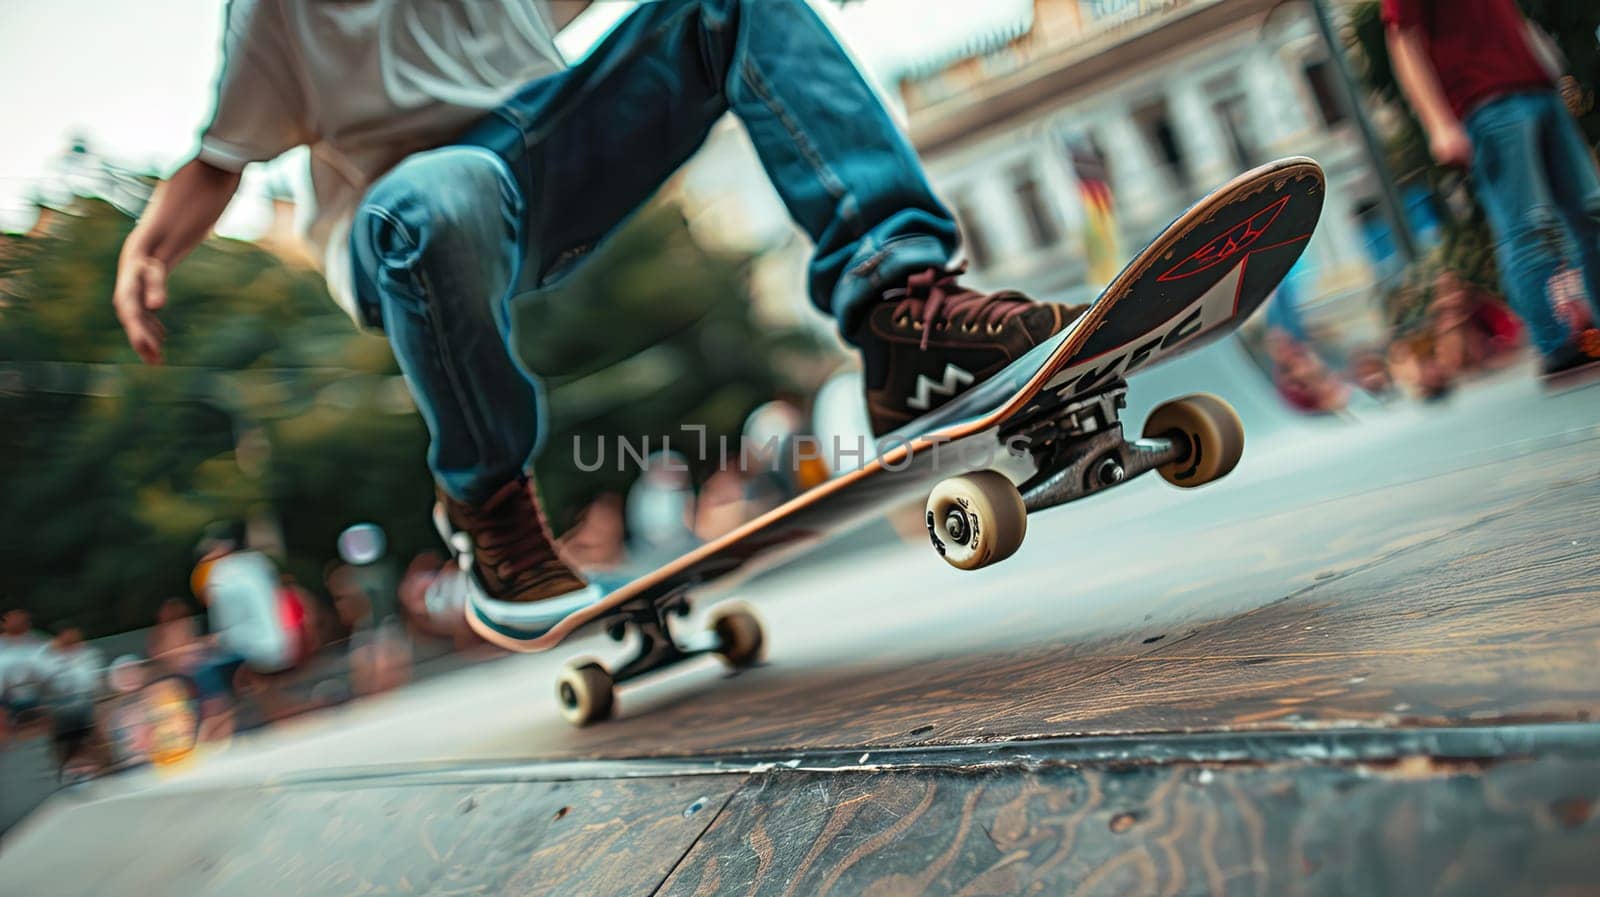 A man confidently rides a skateboard down the side of a ramp, showcasing his skill and balance as he executes the maneuver.